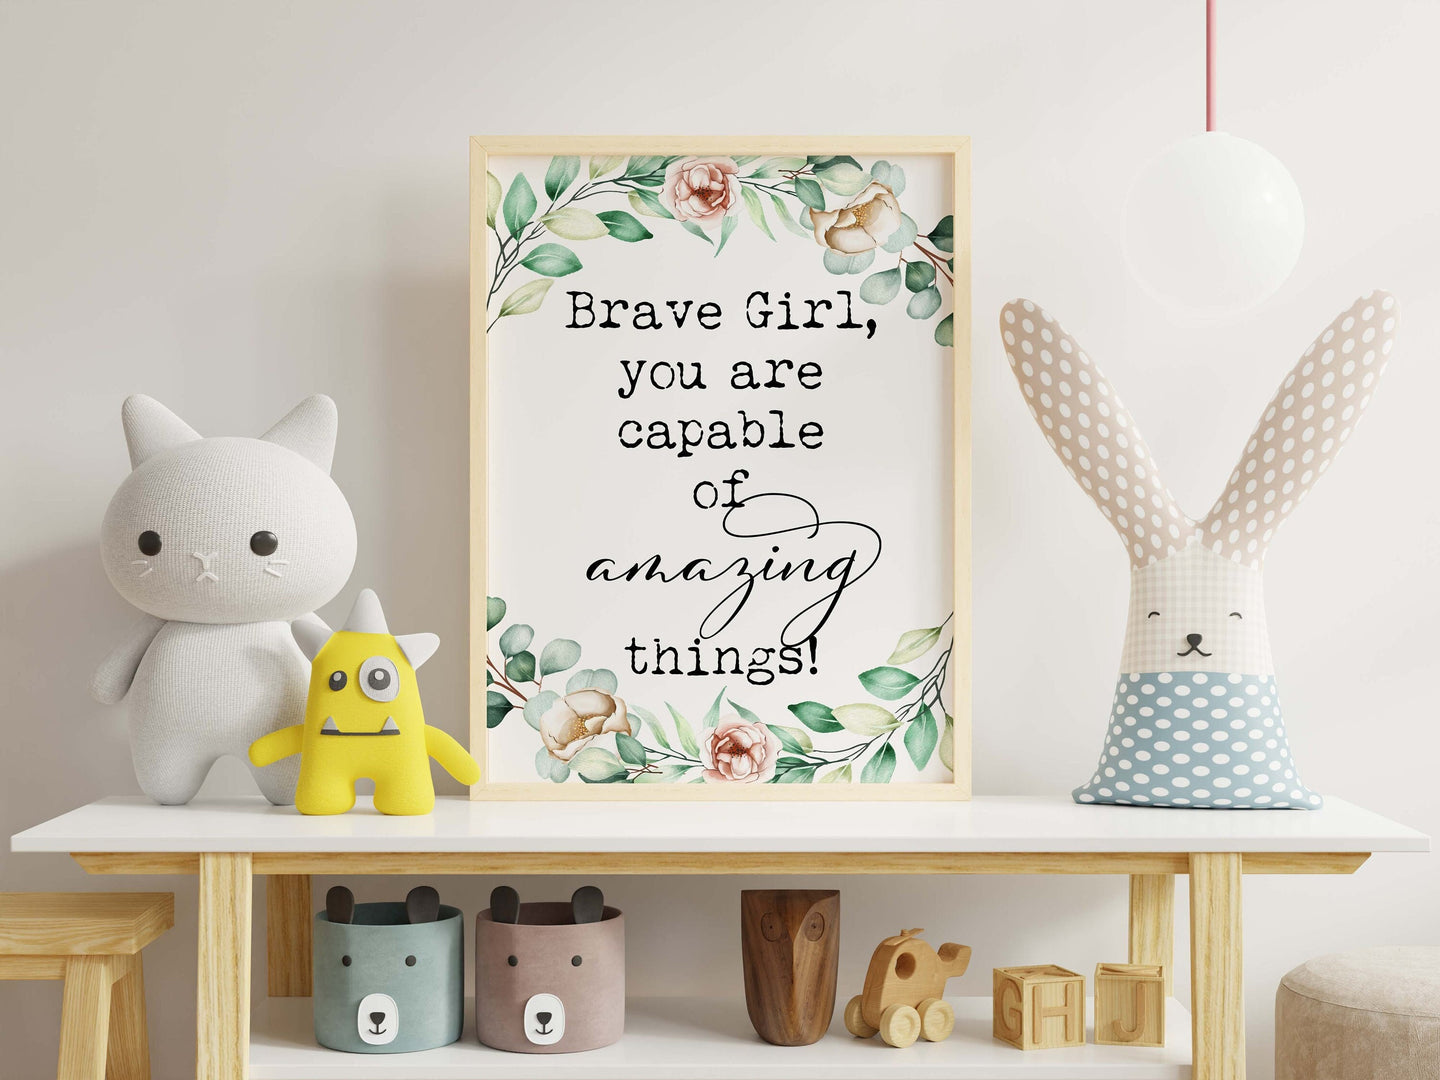 Brave Girl, you are capable of amazing things! Inspirational girl's bedroom wall art - Unframed